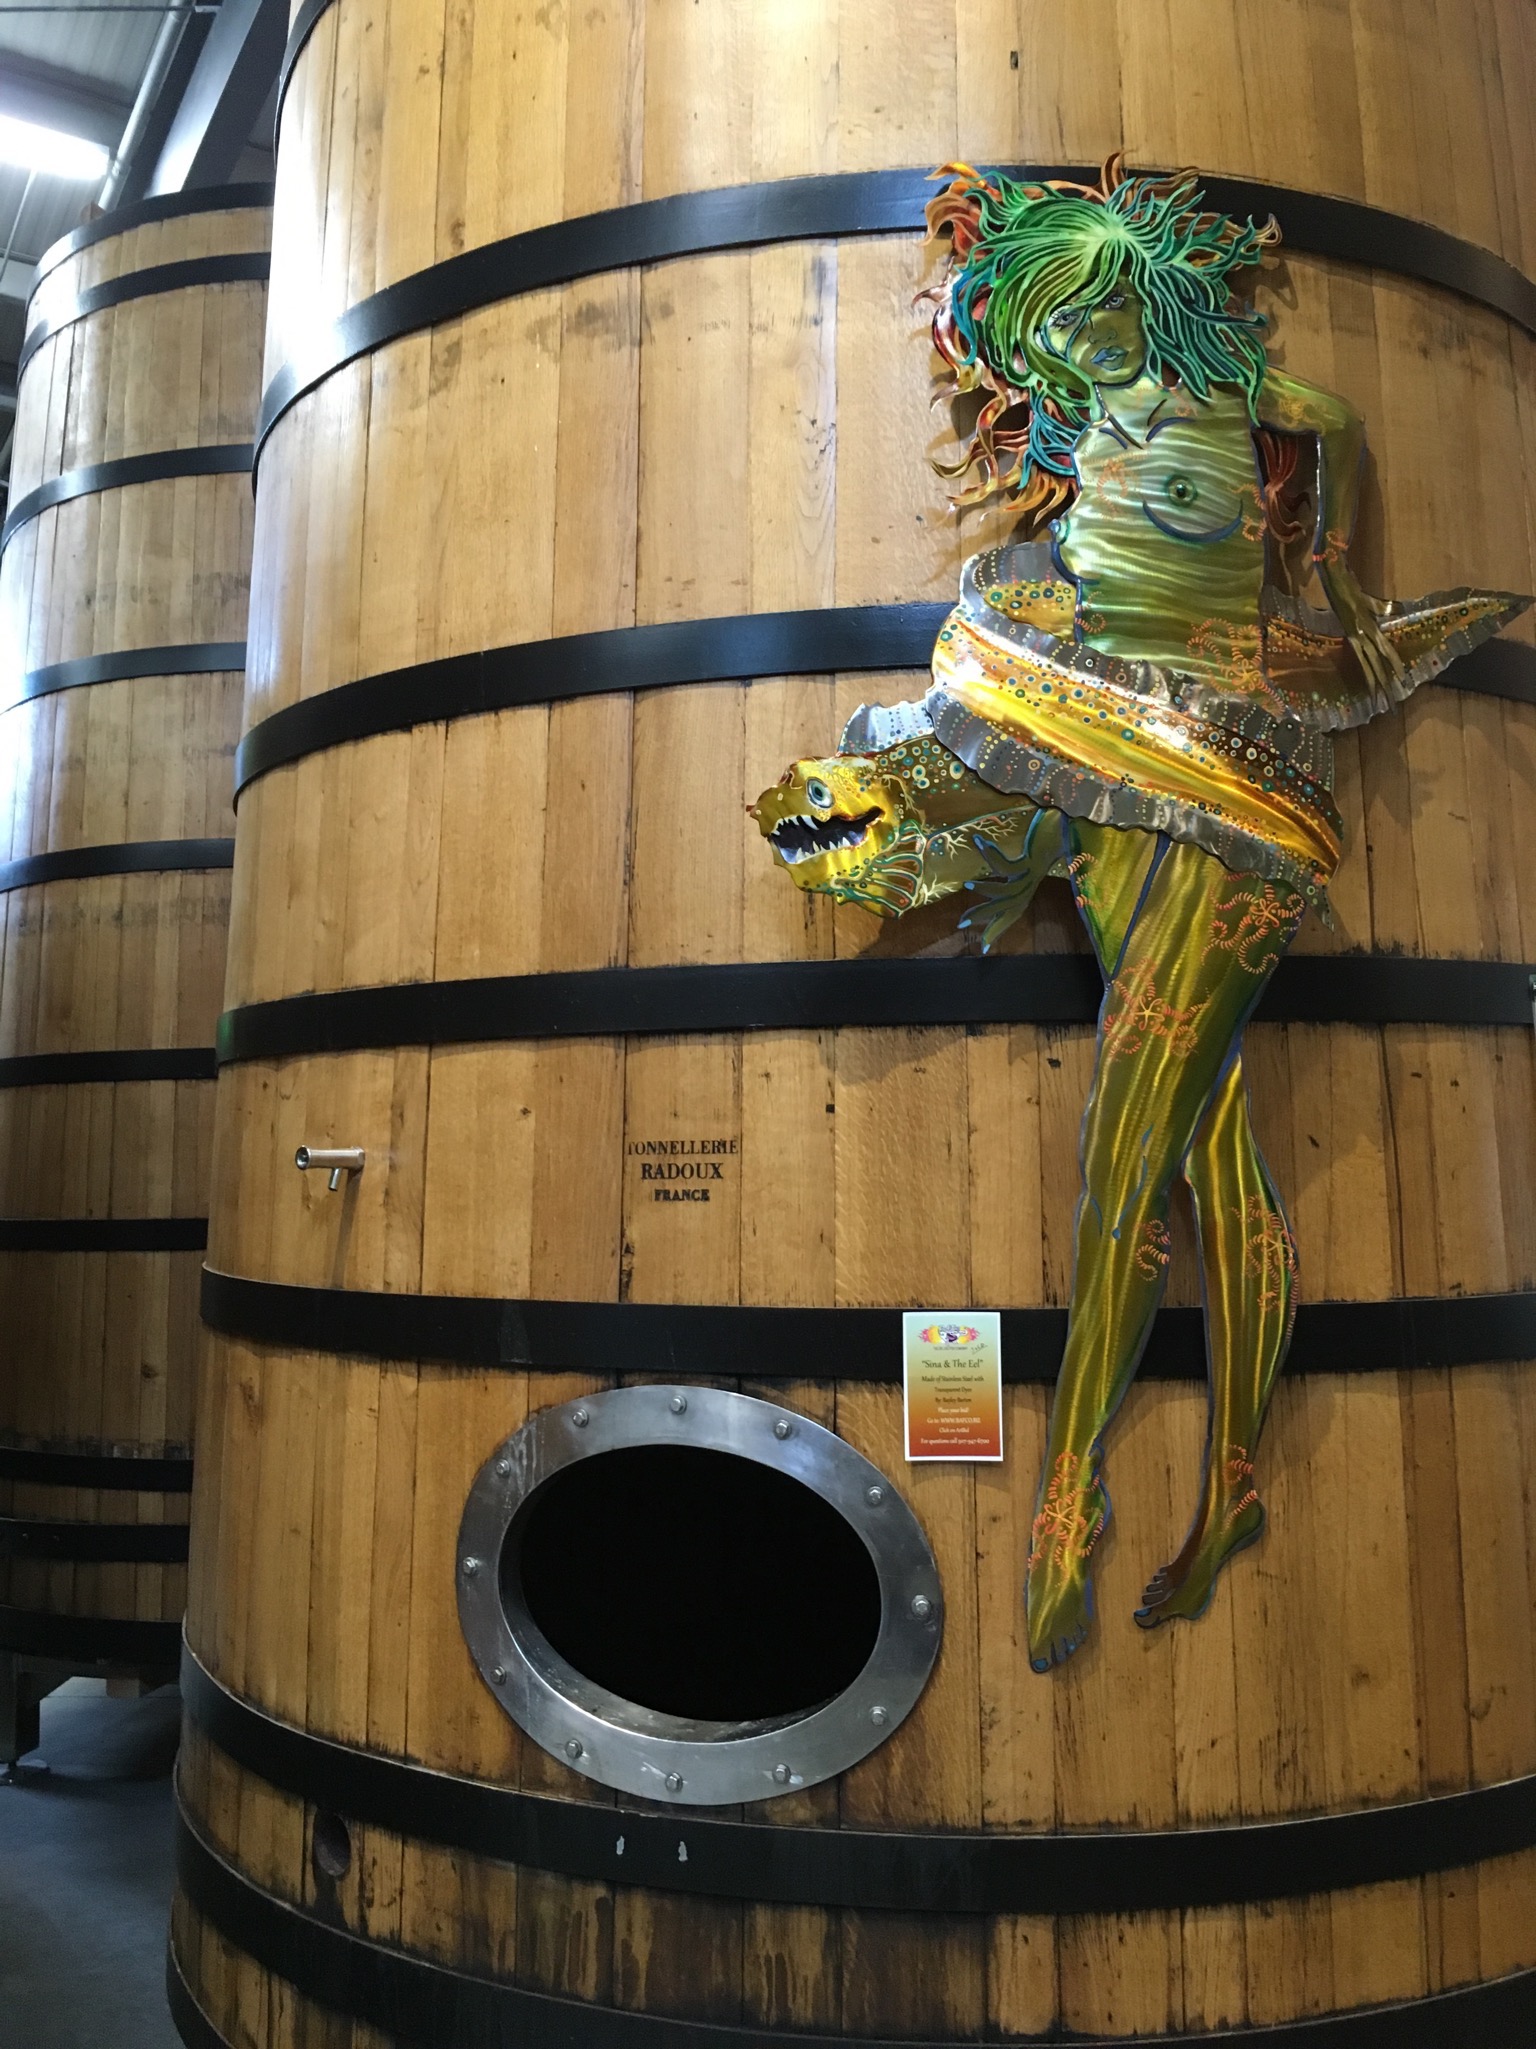 Artwork adorns the foeders at Anchorage Brewing. (photo by Cat Stelzer)